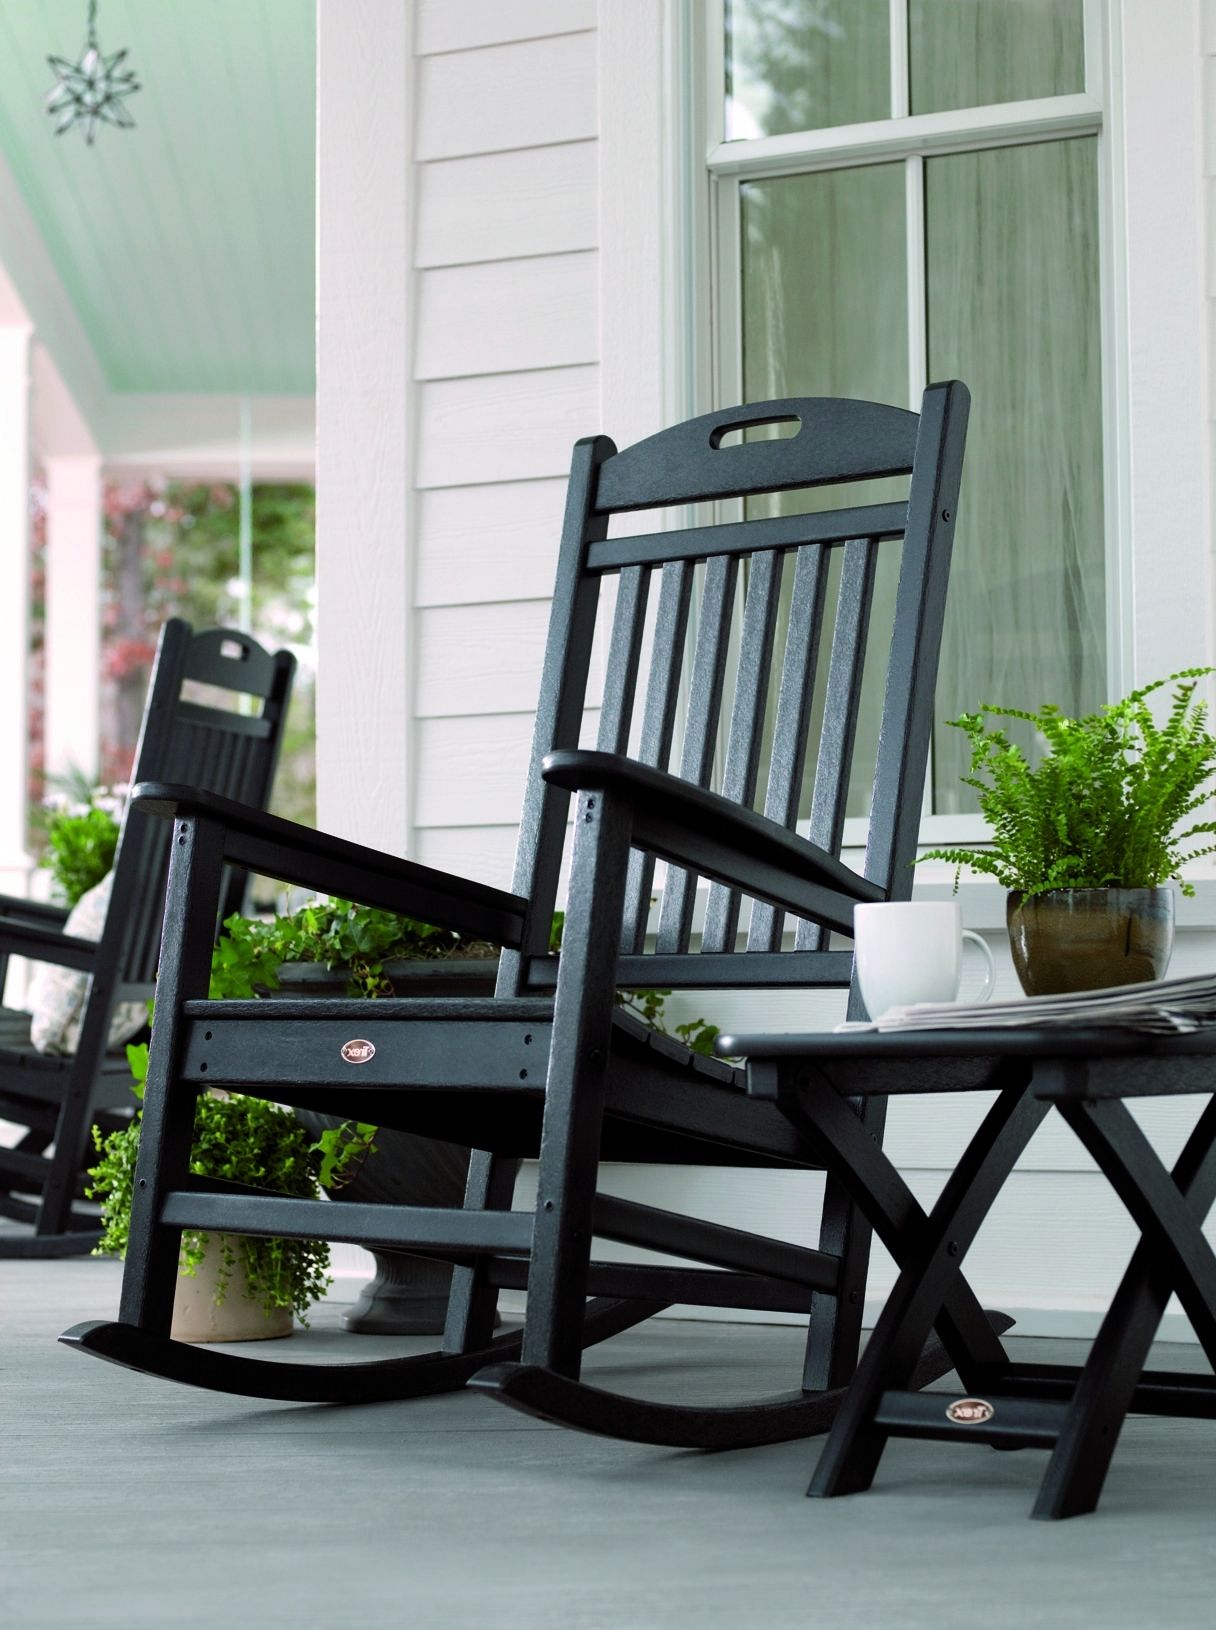 Favorite Great Black Oak Woods Rocking Chairs Rustic Models With Small Inside Vintage Outdoor Rocking Chairs (View 7 of 15)